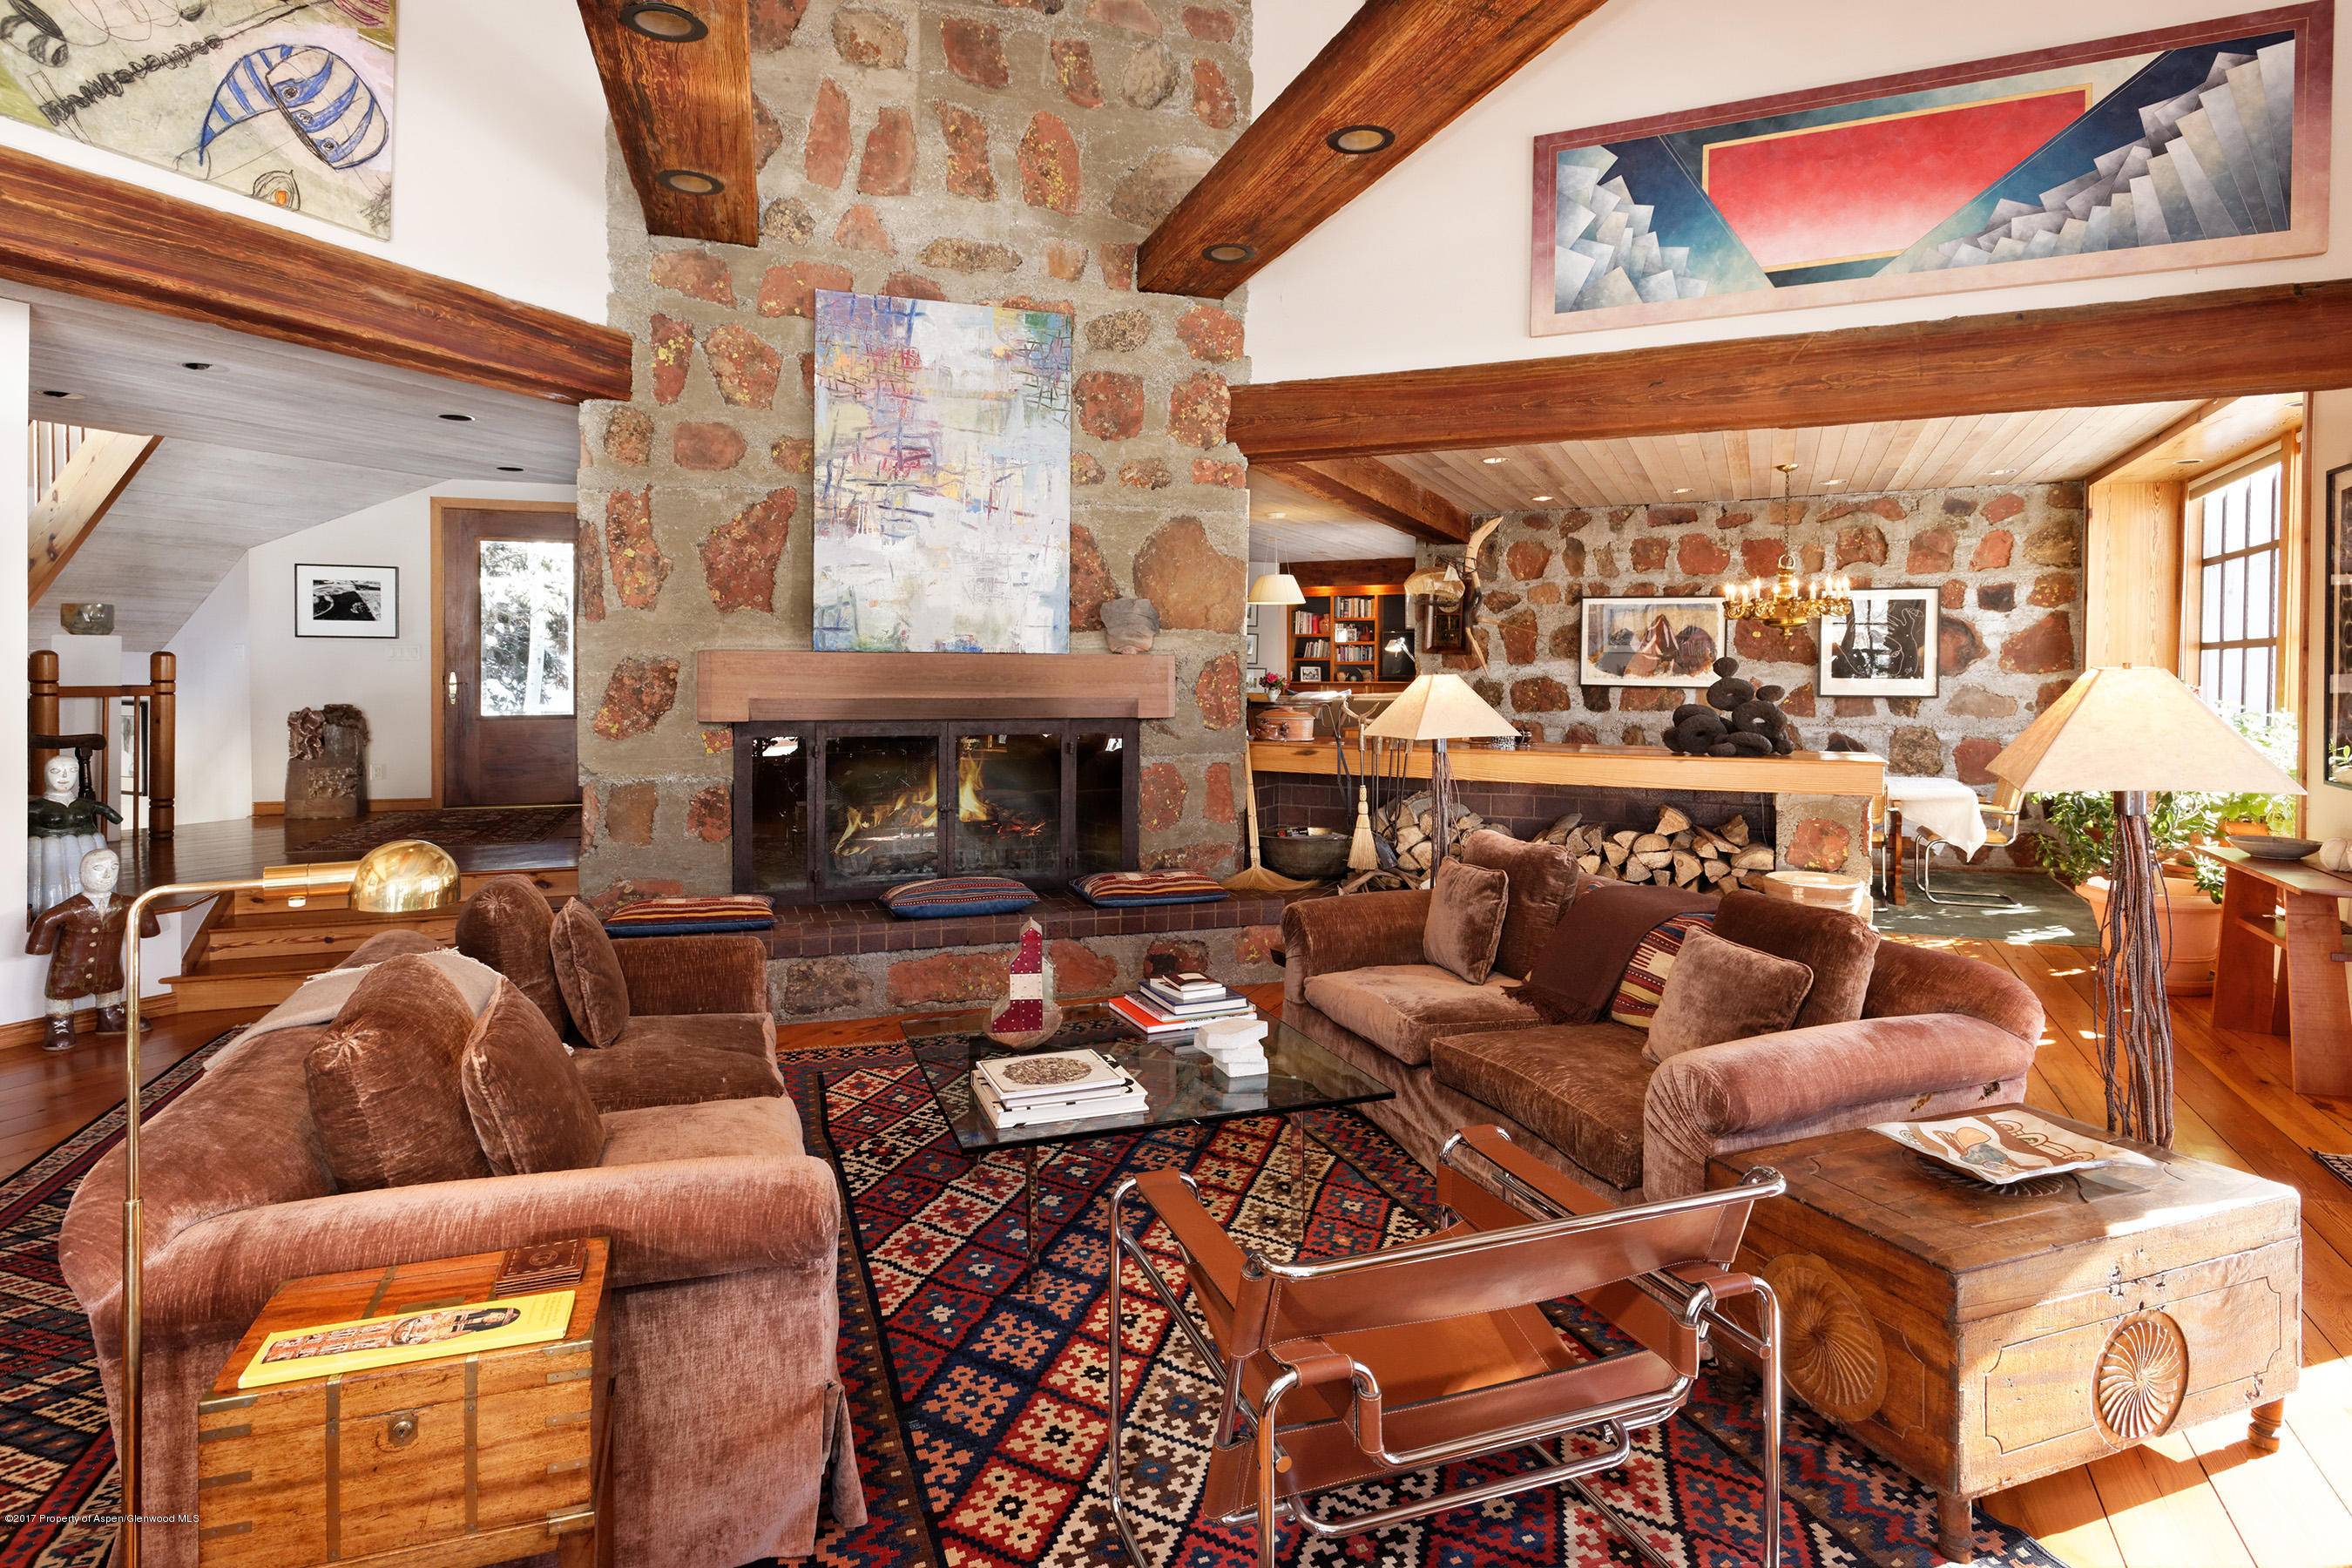 This unique Colorado ski retreat offers four bedrooms, four and one half baths, alarge kitchen and separate living room and great room.